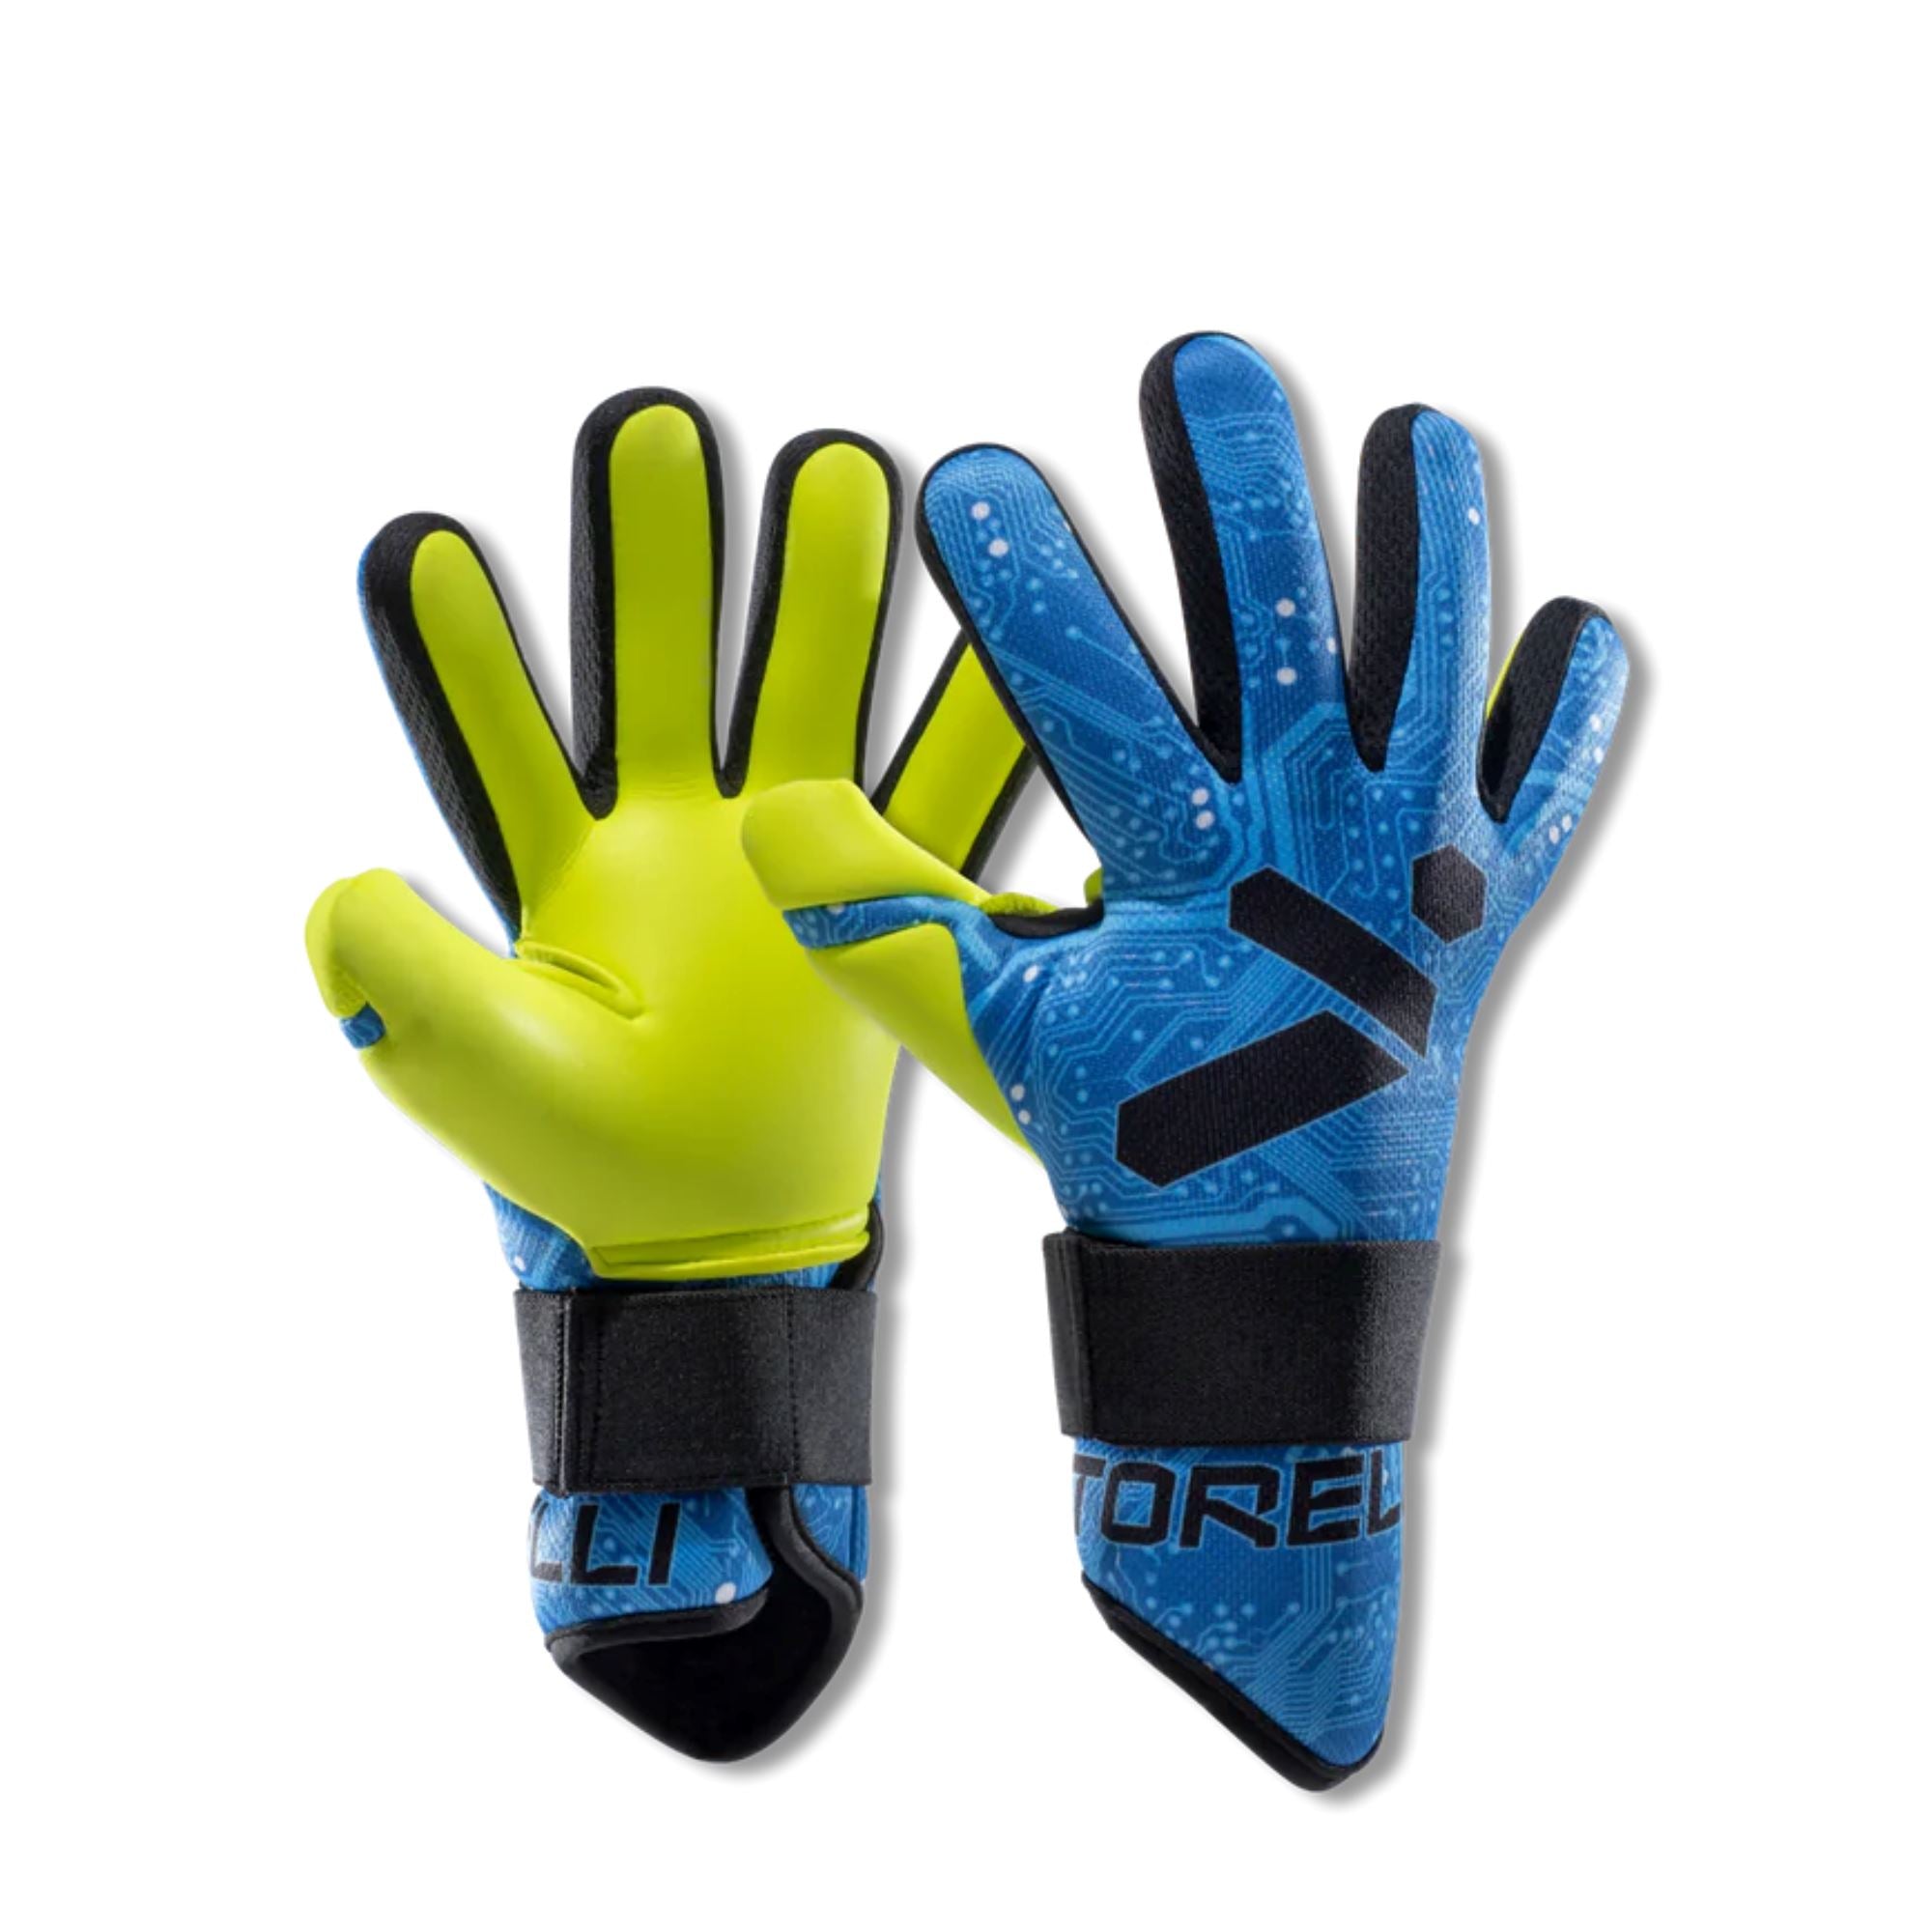 Challenger Youth GK Gloves by Storelli - Blue Circuit - ITASPORT